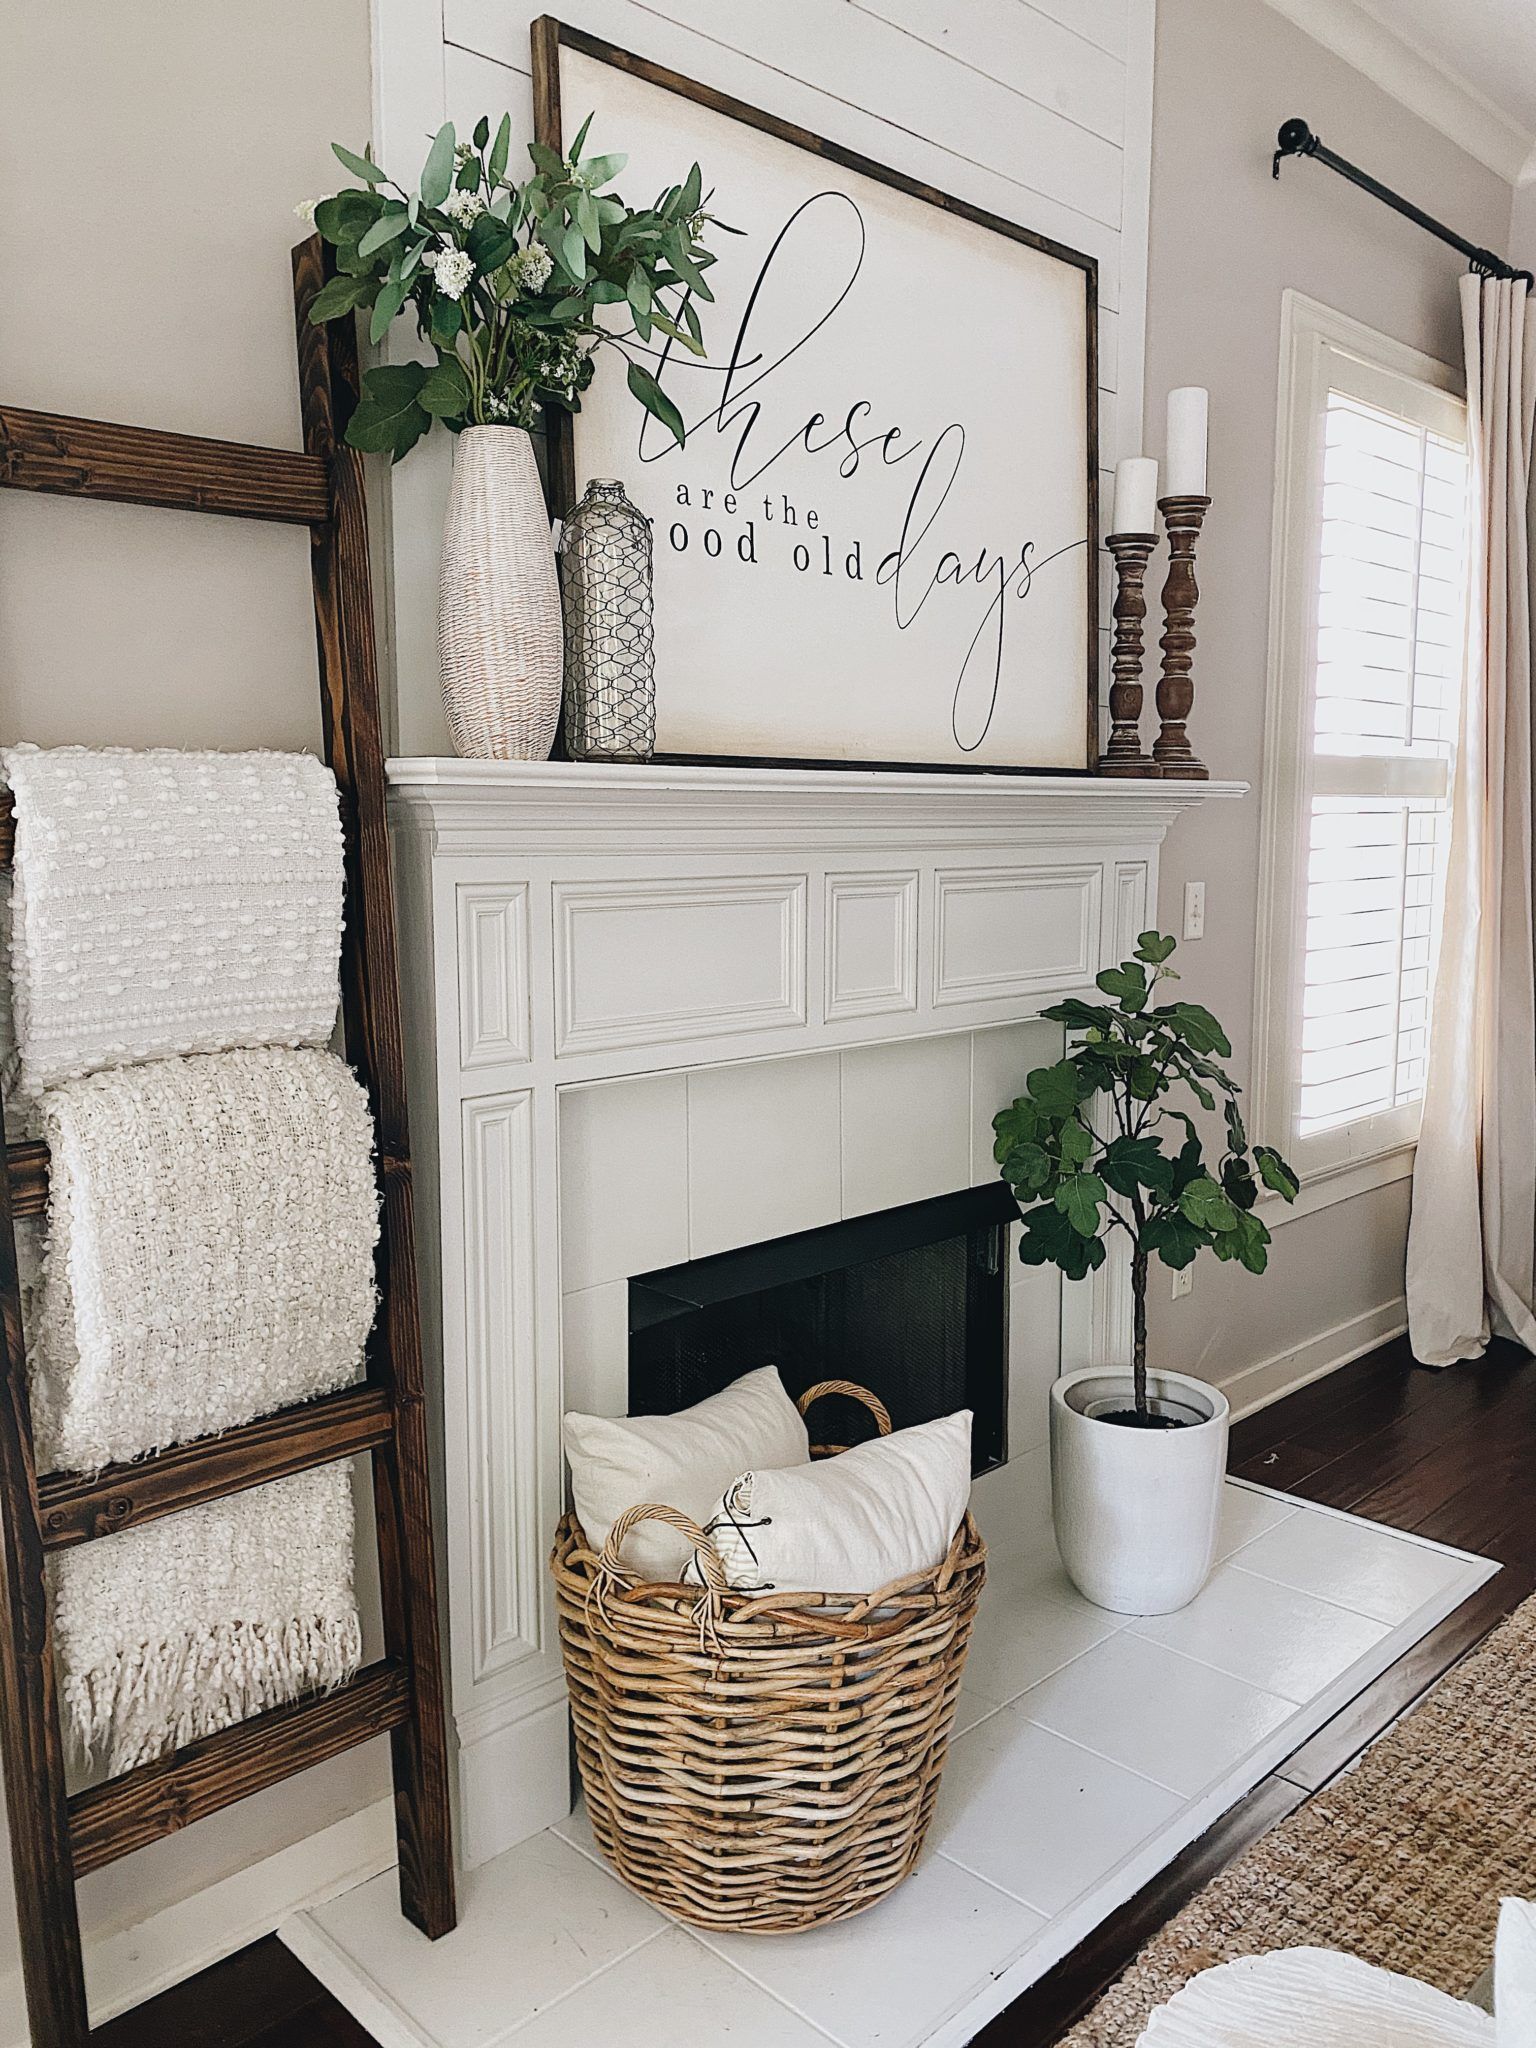 10 Tips To Speed Clean Your Home (Before Guests Arrive!) - She Gave It A Go -   14 farmhouse living room wall decorations ideas